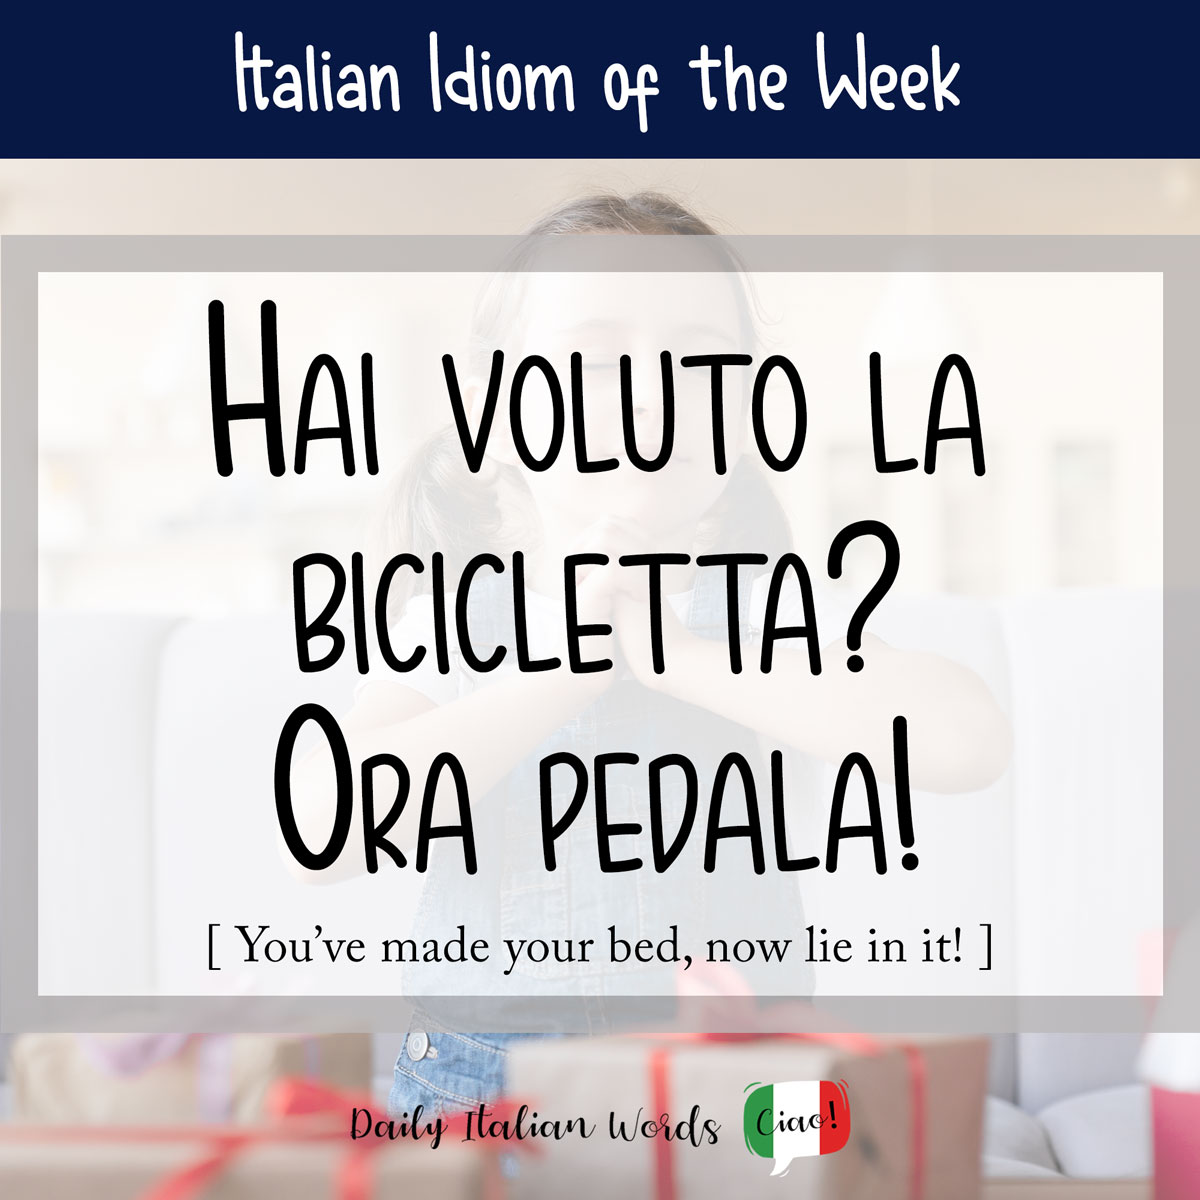 Italian proverb: Do you want a bicycle? Ride now!  (You’ve made the bed, now lie on it!)